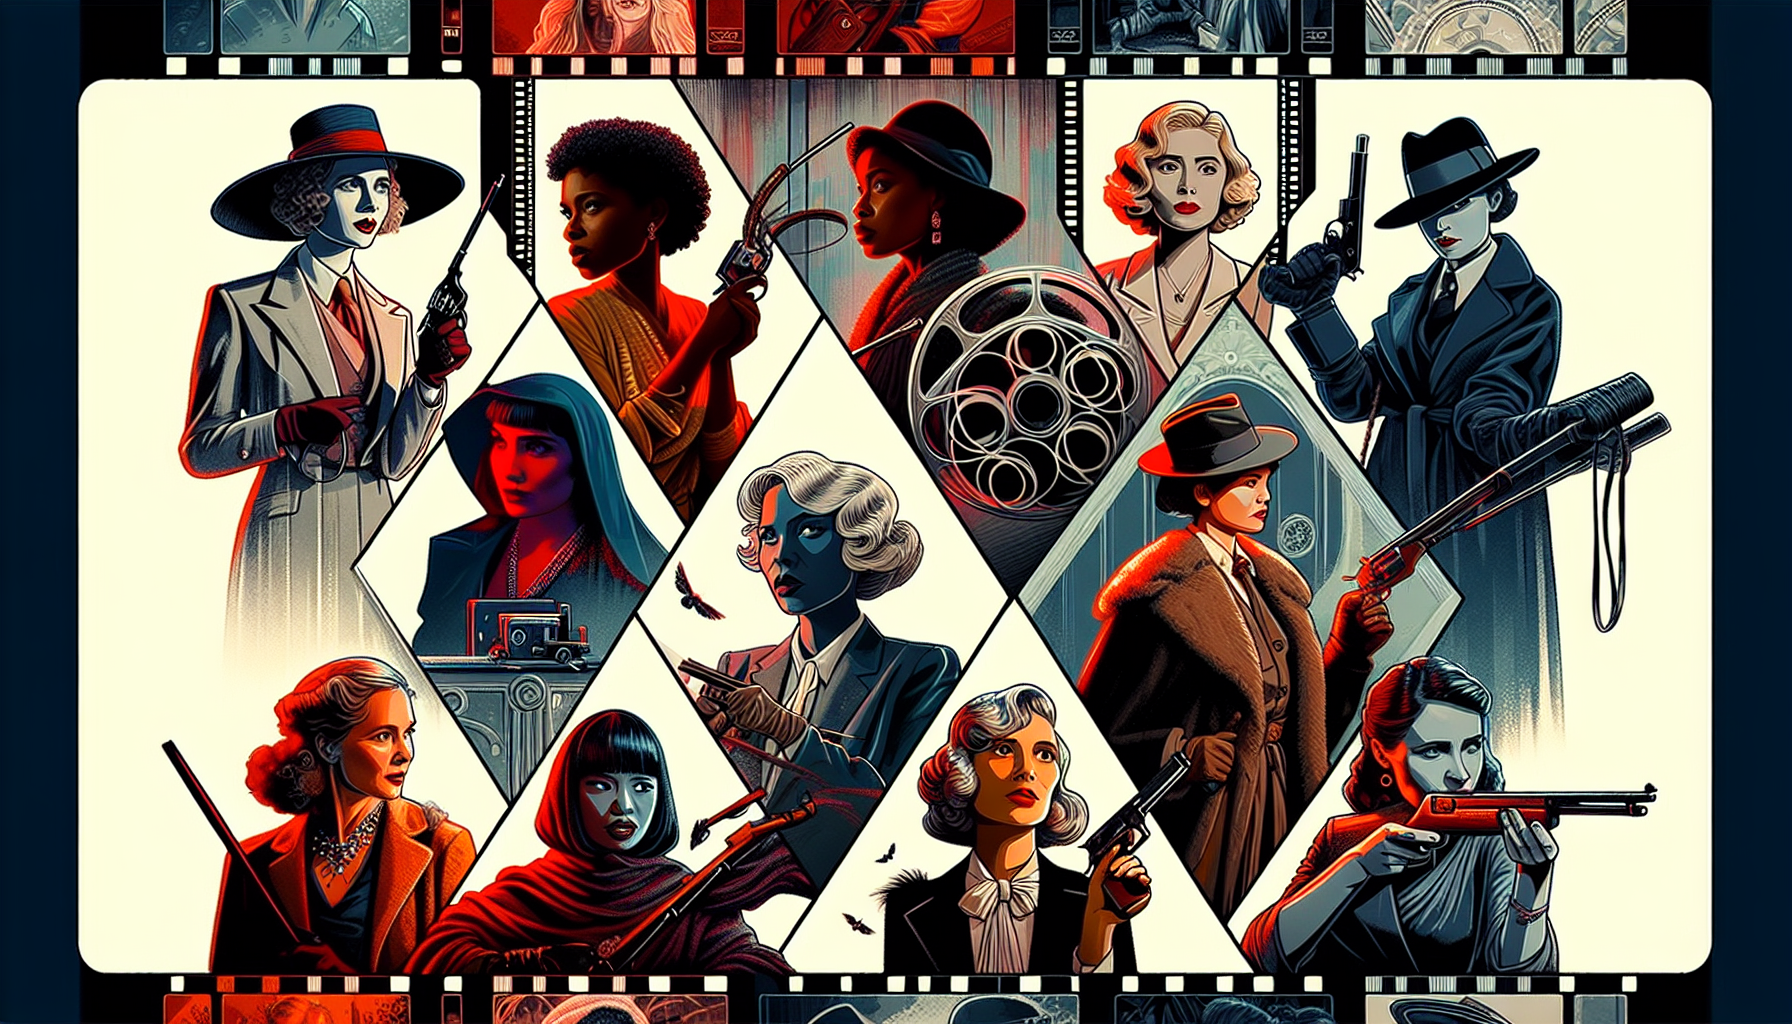 A cinematic poster collage depicting the ten most lethal femme fatales in film history, each framed within a vintage film strip, shown in dramatic poses with film noir inspired backdrop and lighting,